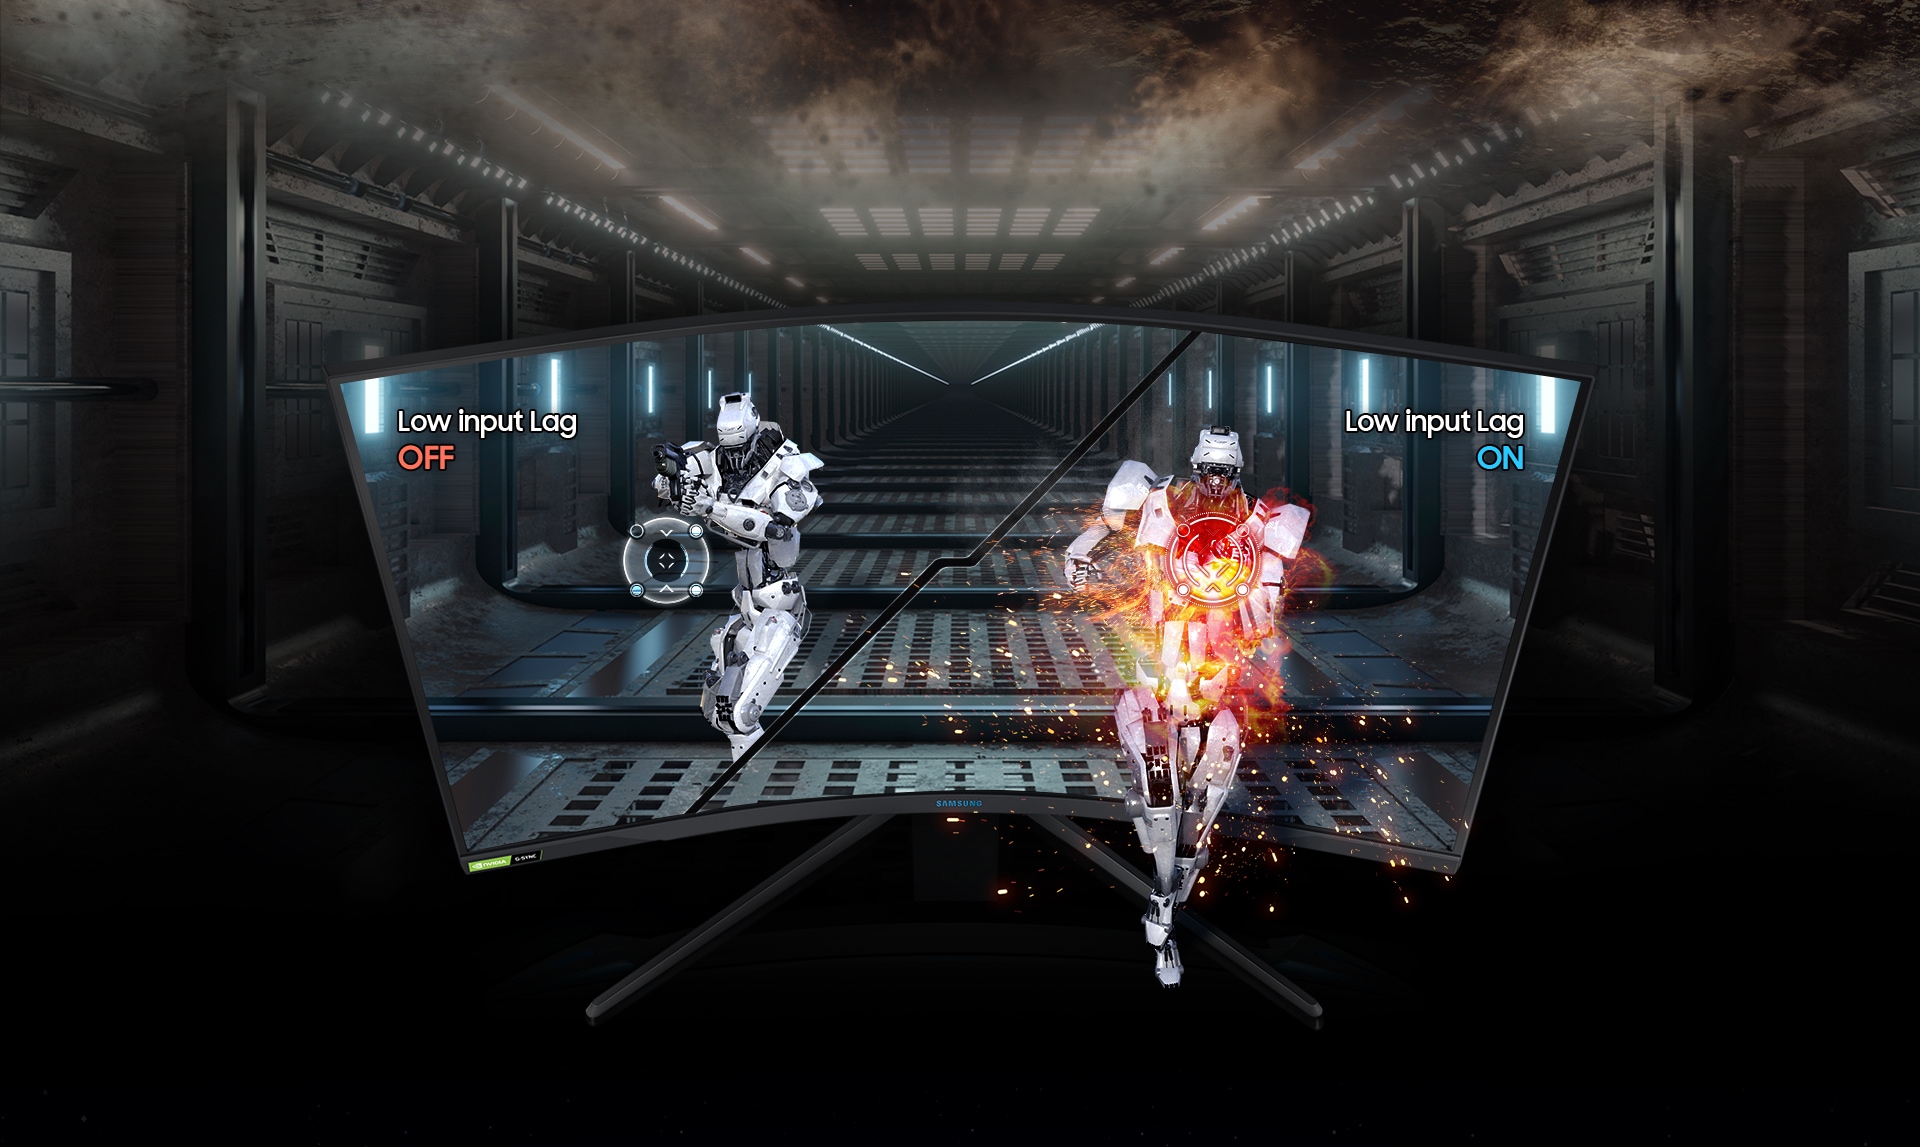 A G75T monitor shows the hallway of a spaceship, which extends off the screen into the background. The screen is split into left and right sides with attacking robots running forward with rifles on each side. On the left, the word “Low Input Lag OFF” is shown while an aiming marker is positioned to the left of the robot. On the right, the word “Low Input Lag ON” is shown while the aiming marker has successfully fired on the robot. 